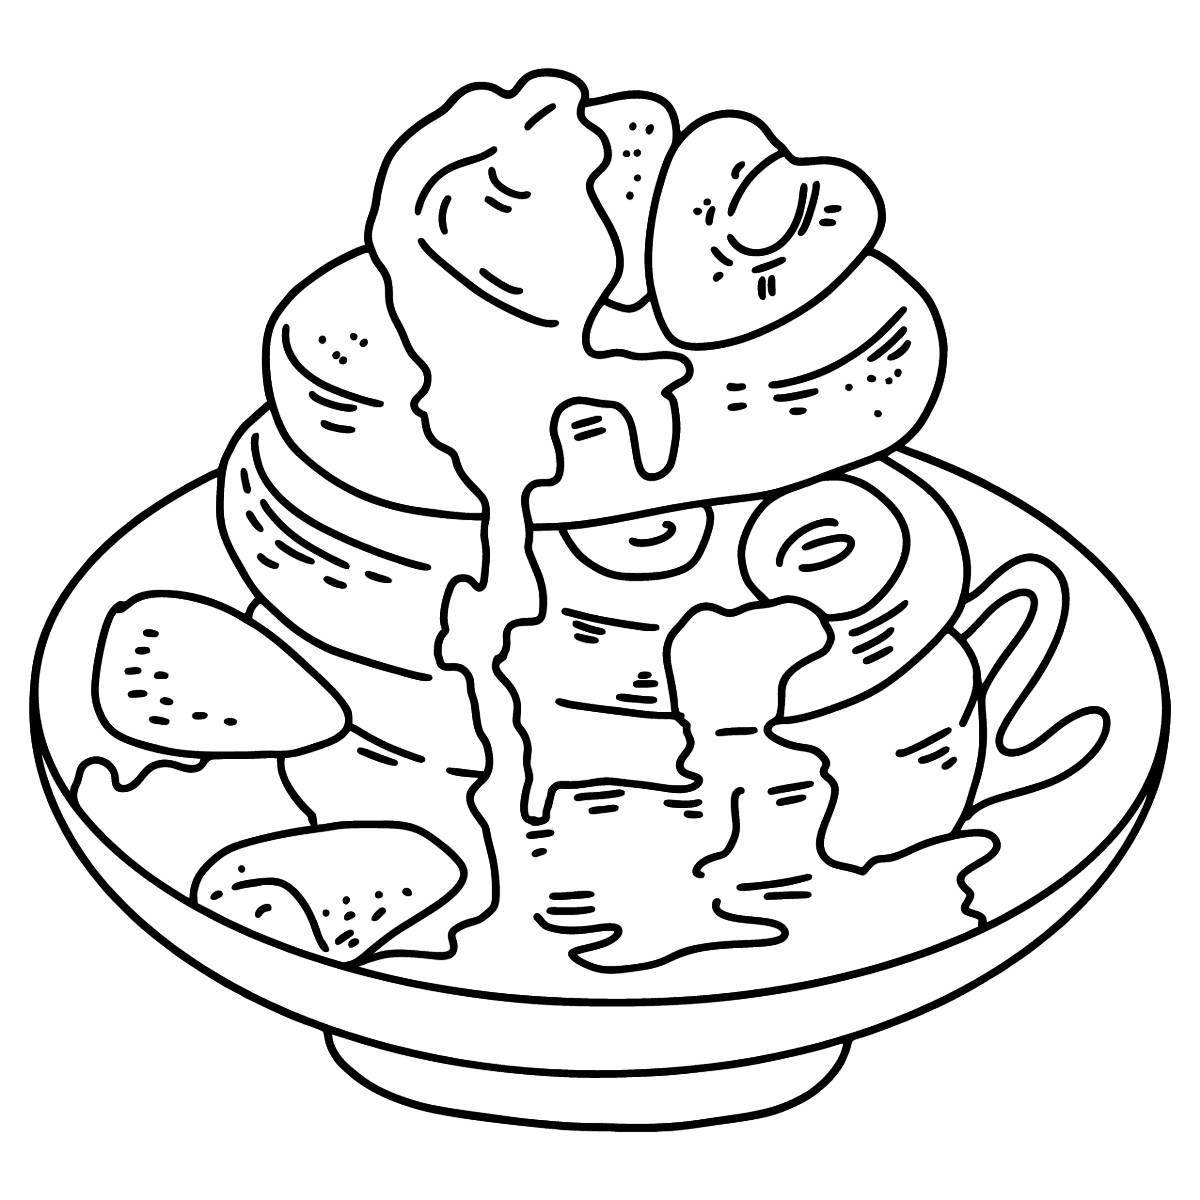 Great pancakes coloring book for kids